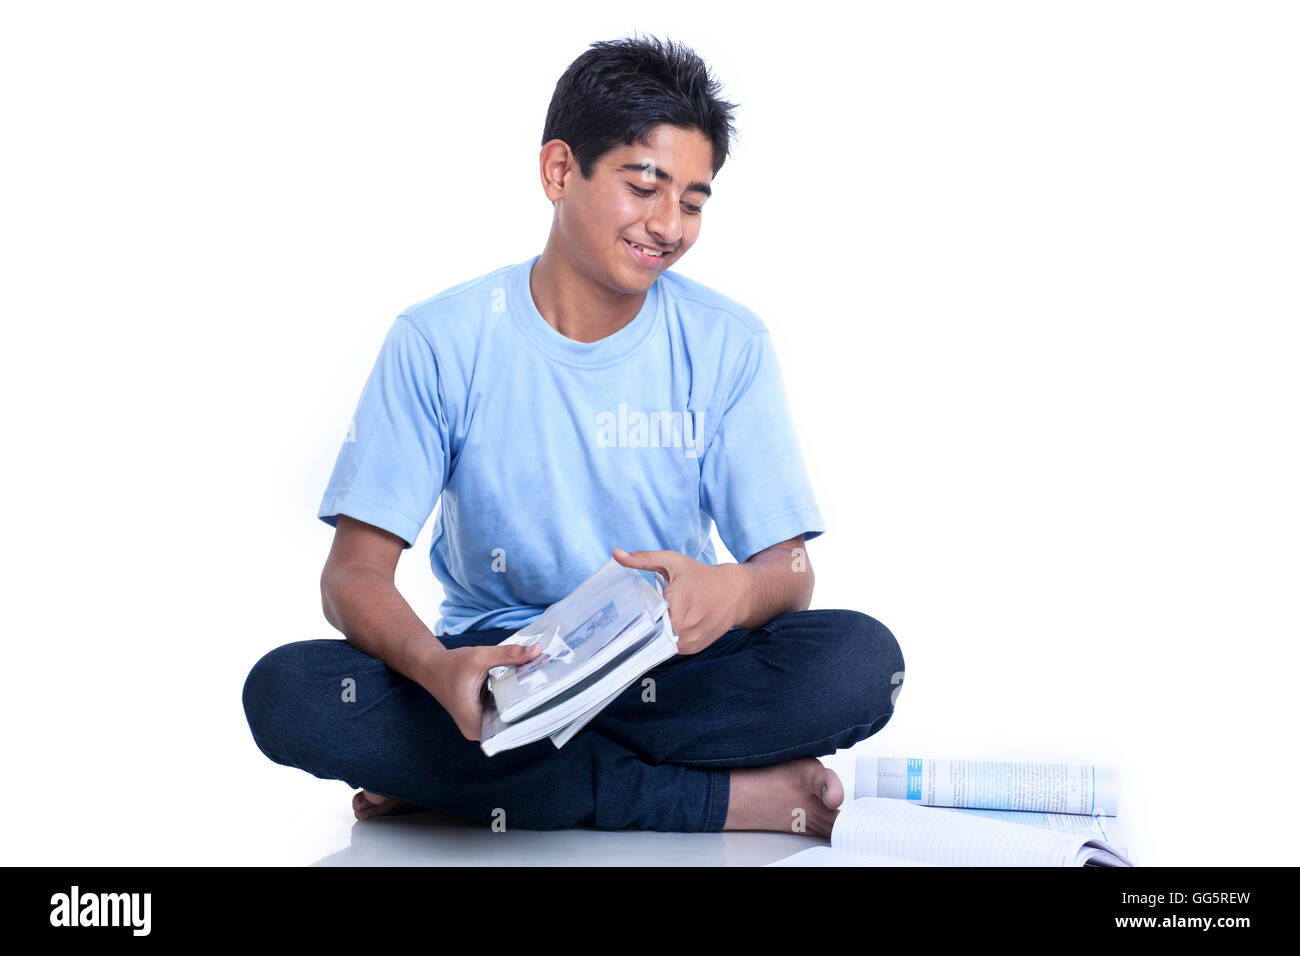 Smiling teenage boy with books against white background Stock Photo